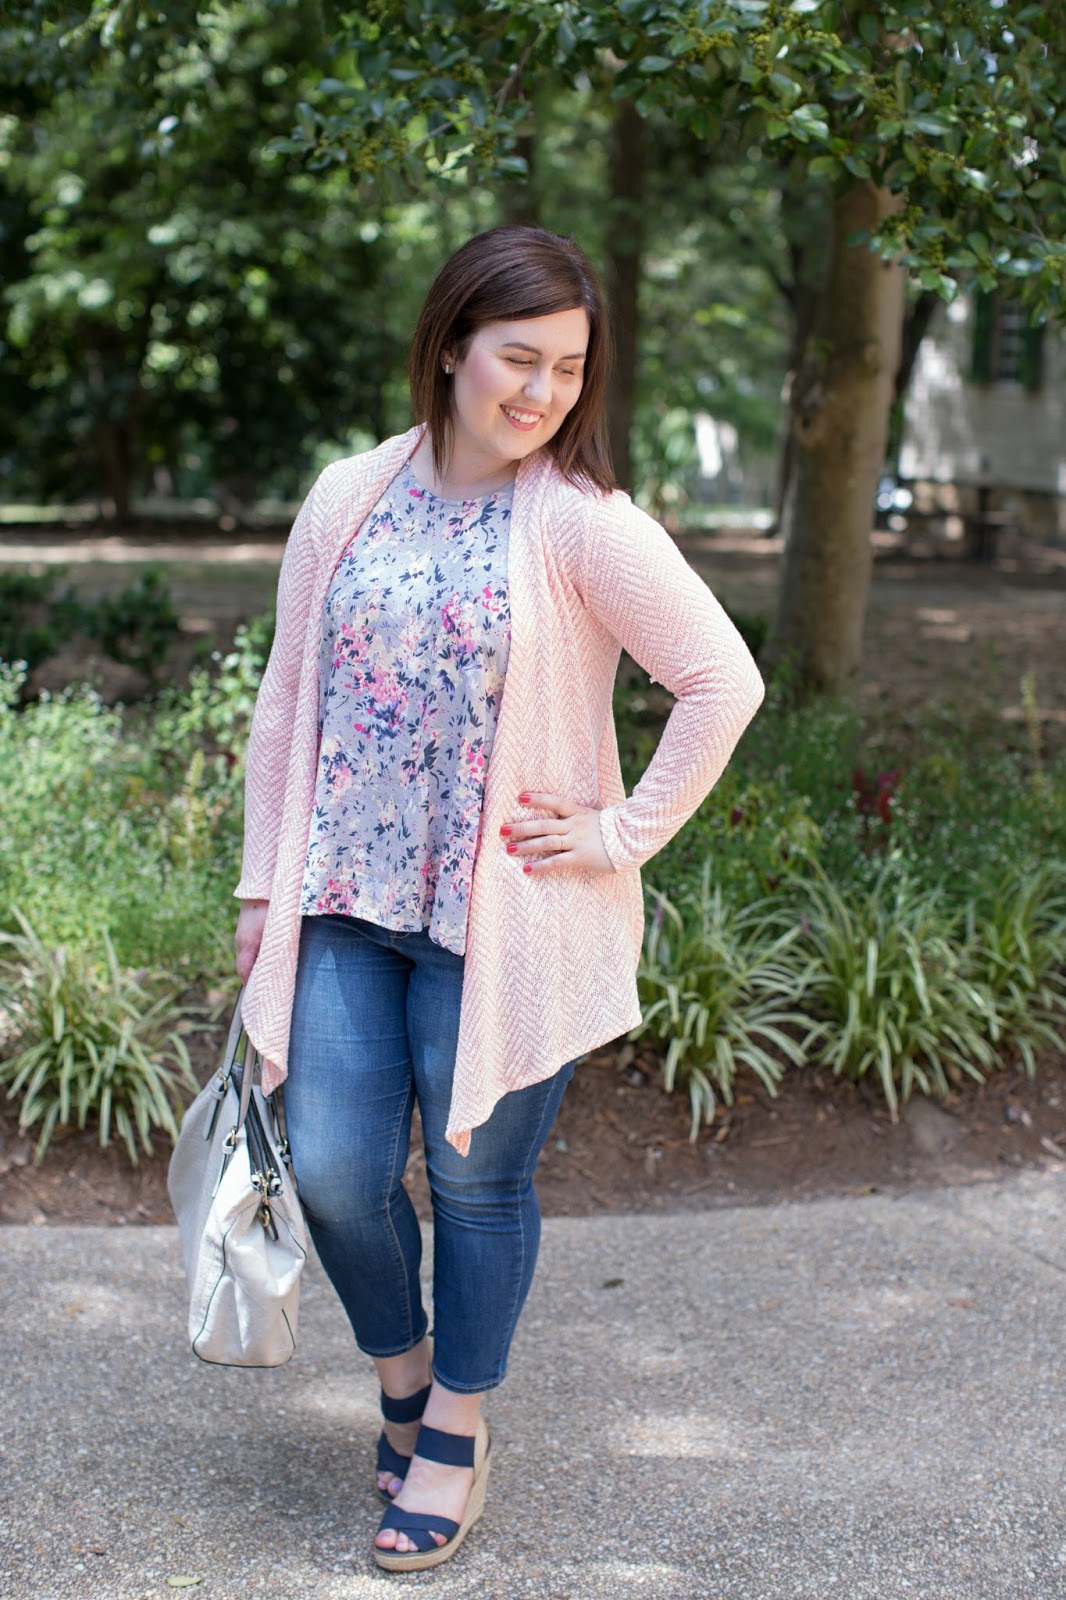 Popular North Carolina style blogger Rebecca Lately shares her favorite items from Stitch Fix. Clear here to see what she loves now!